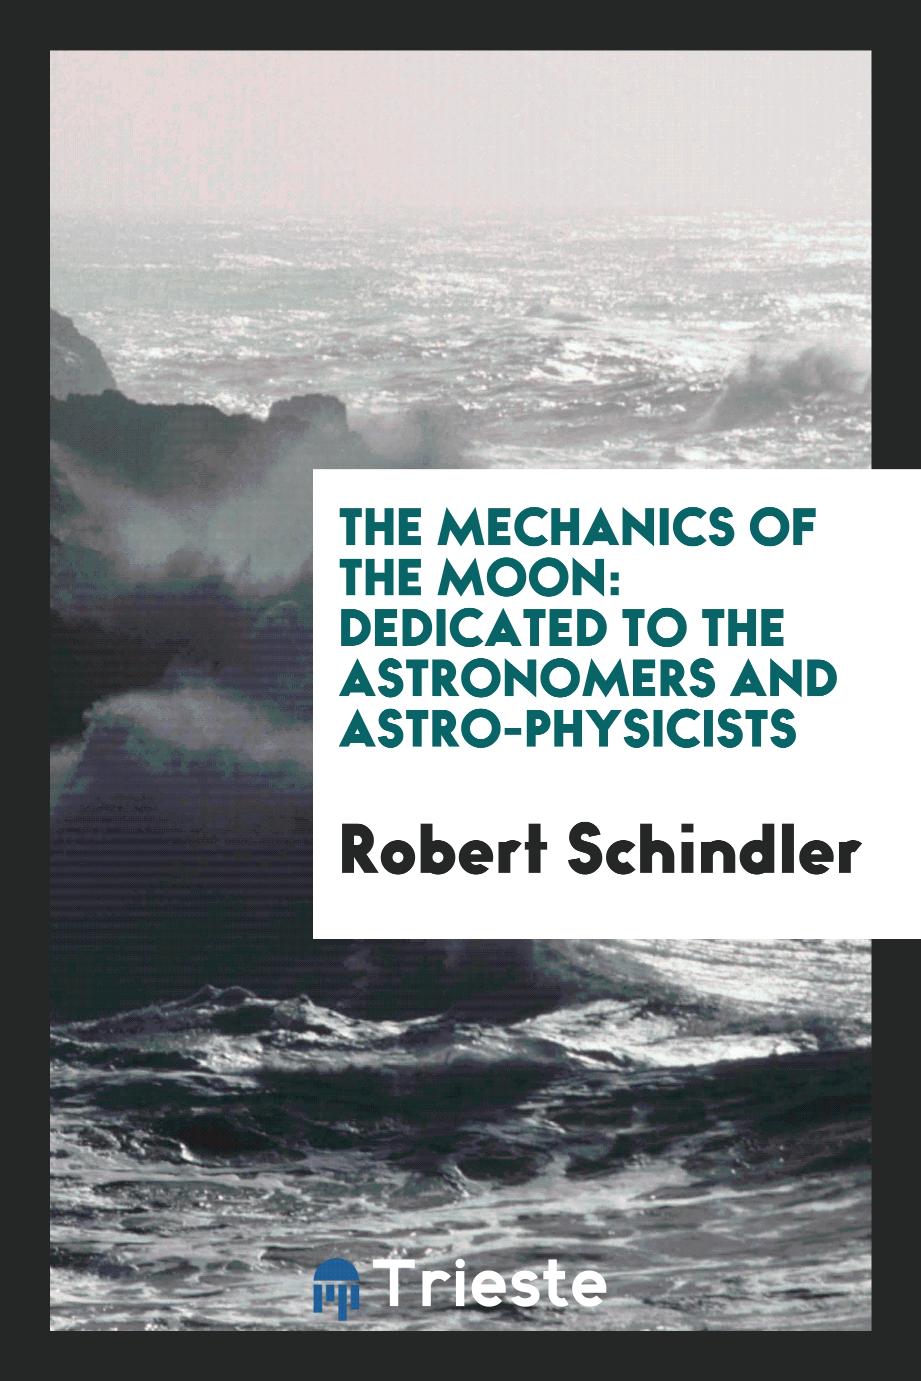 The Mechanics of the Moon: Dedicated to the Astronomers and Astro-physicists